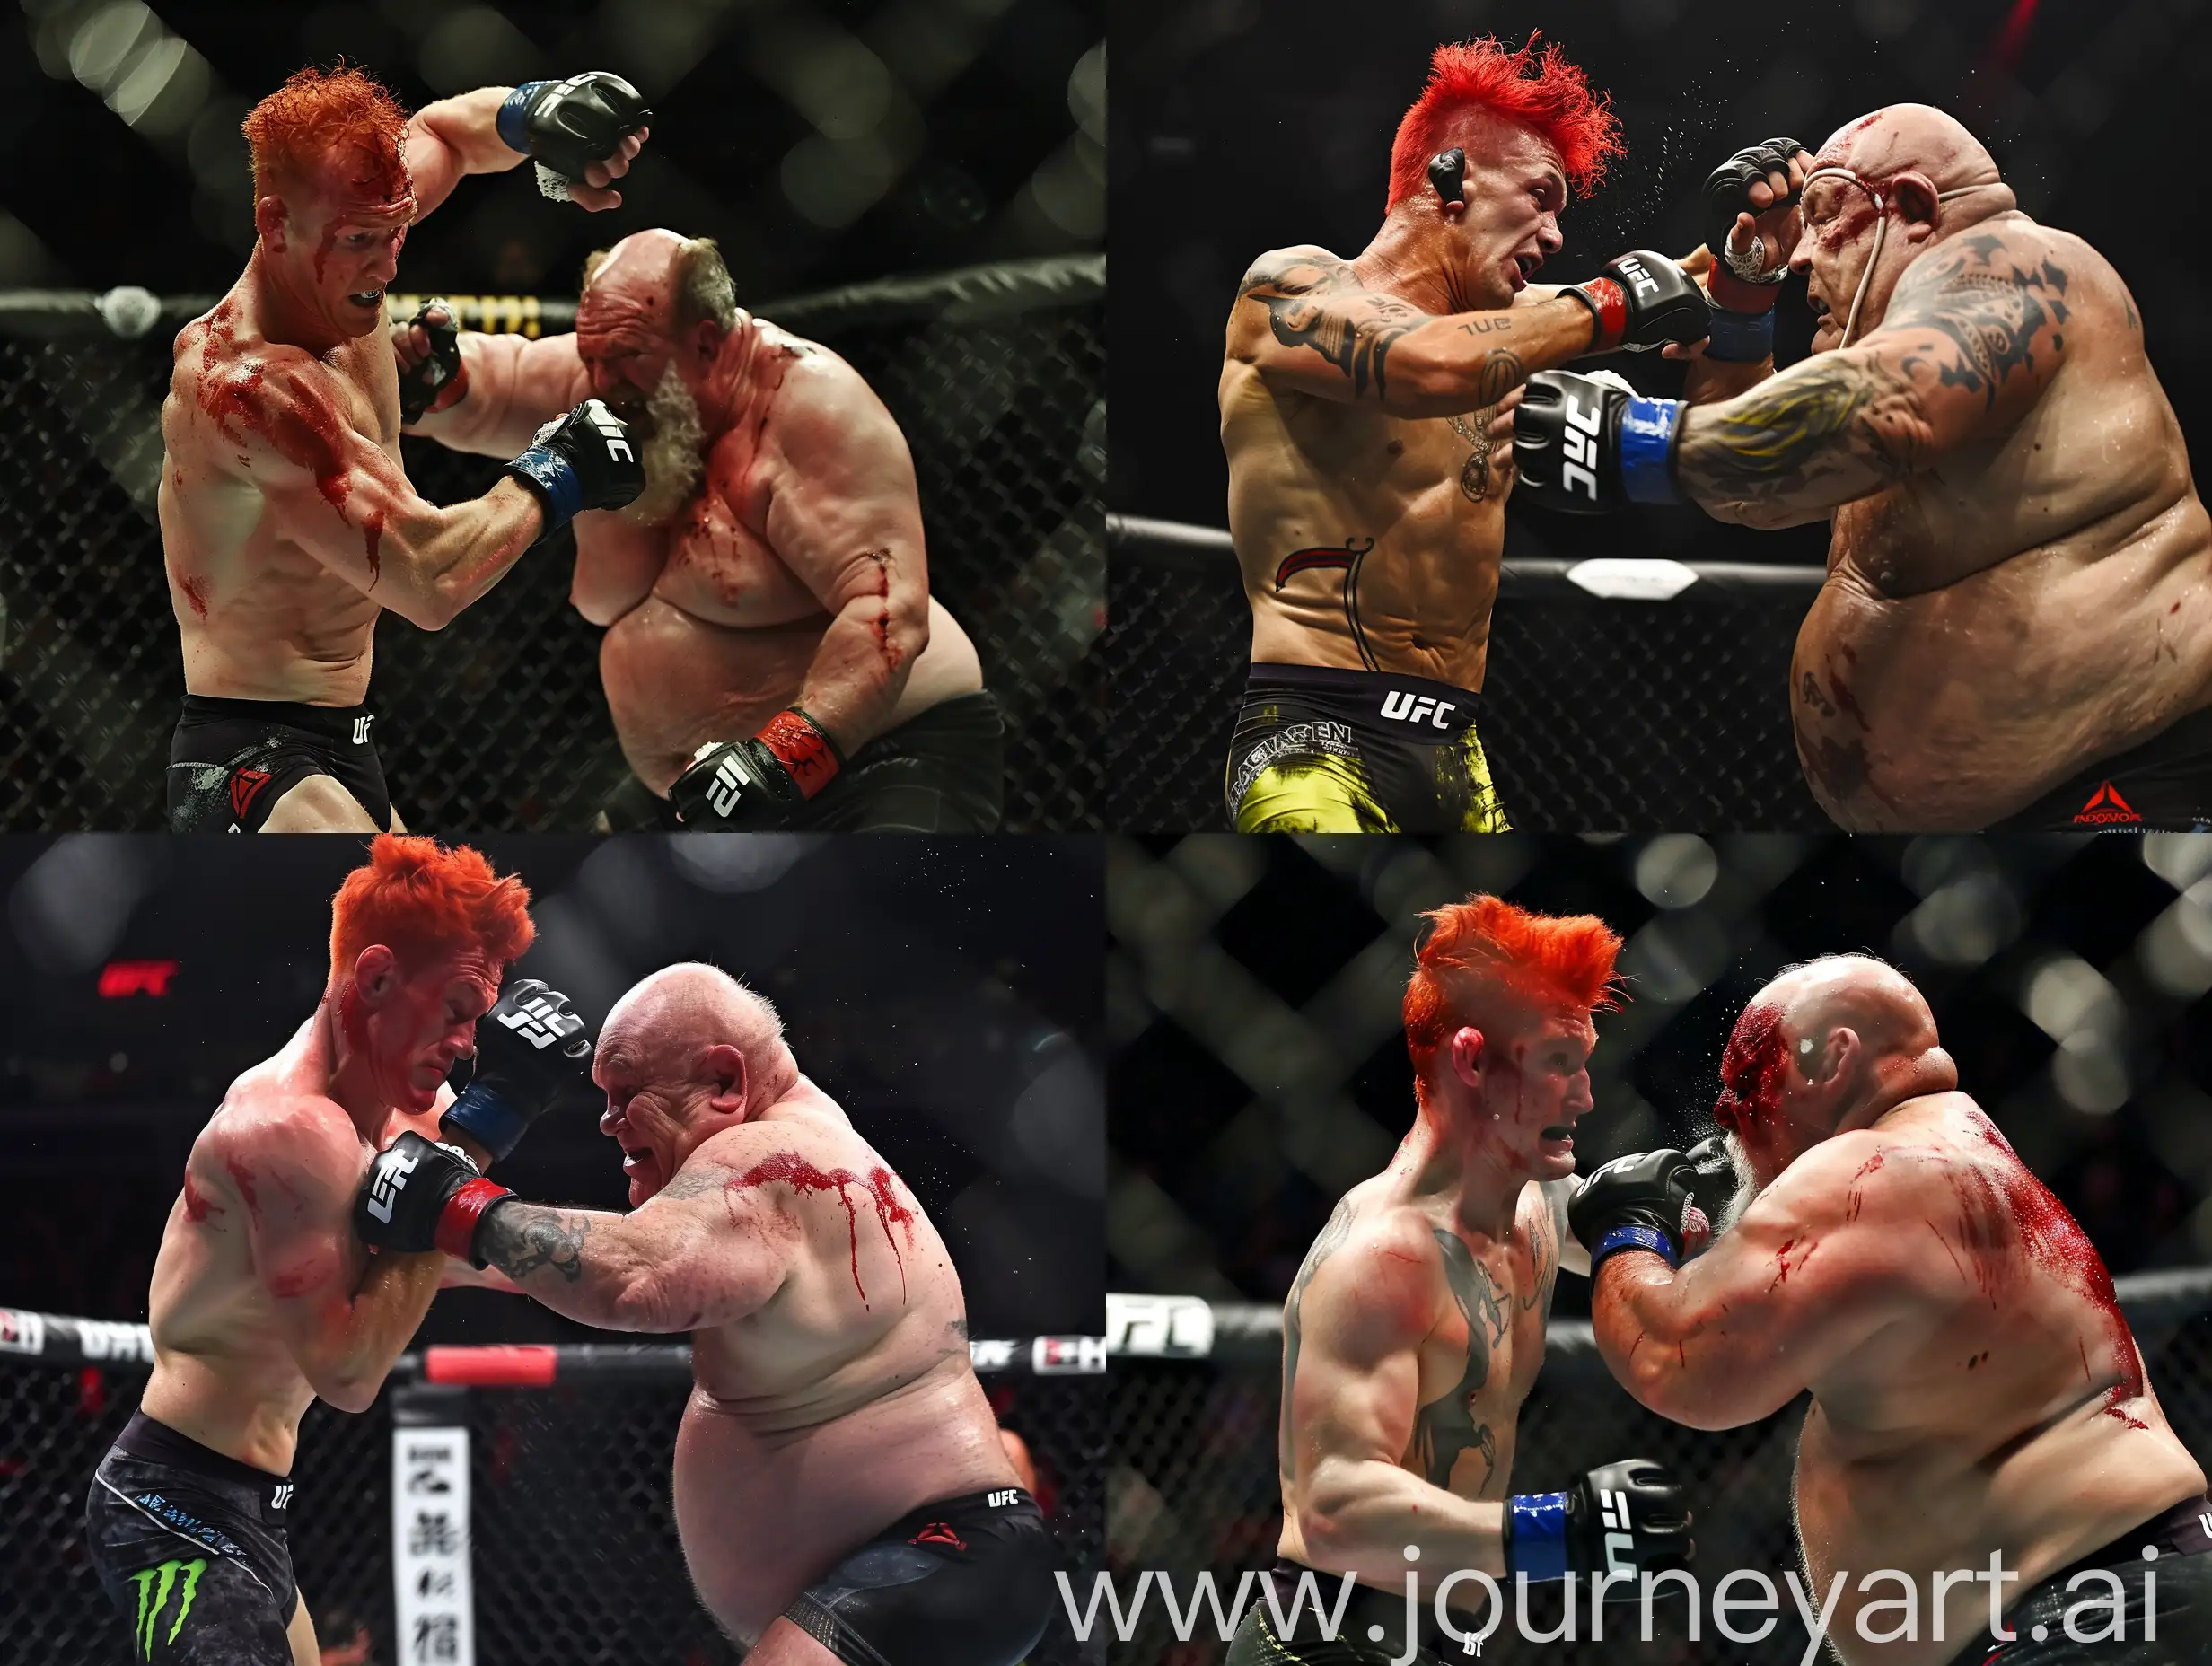 A red-haired, thin guy fights in the UFC octagon with a fat old man